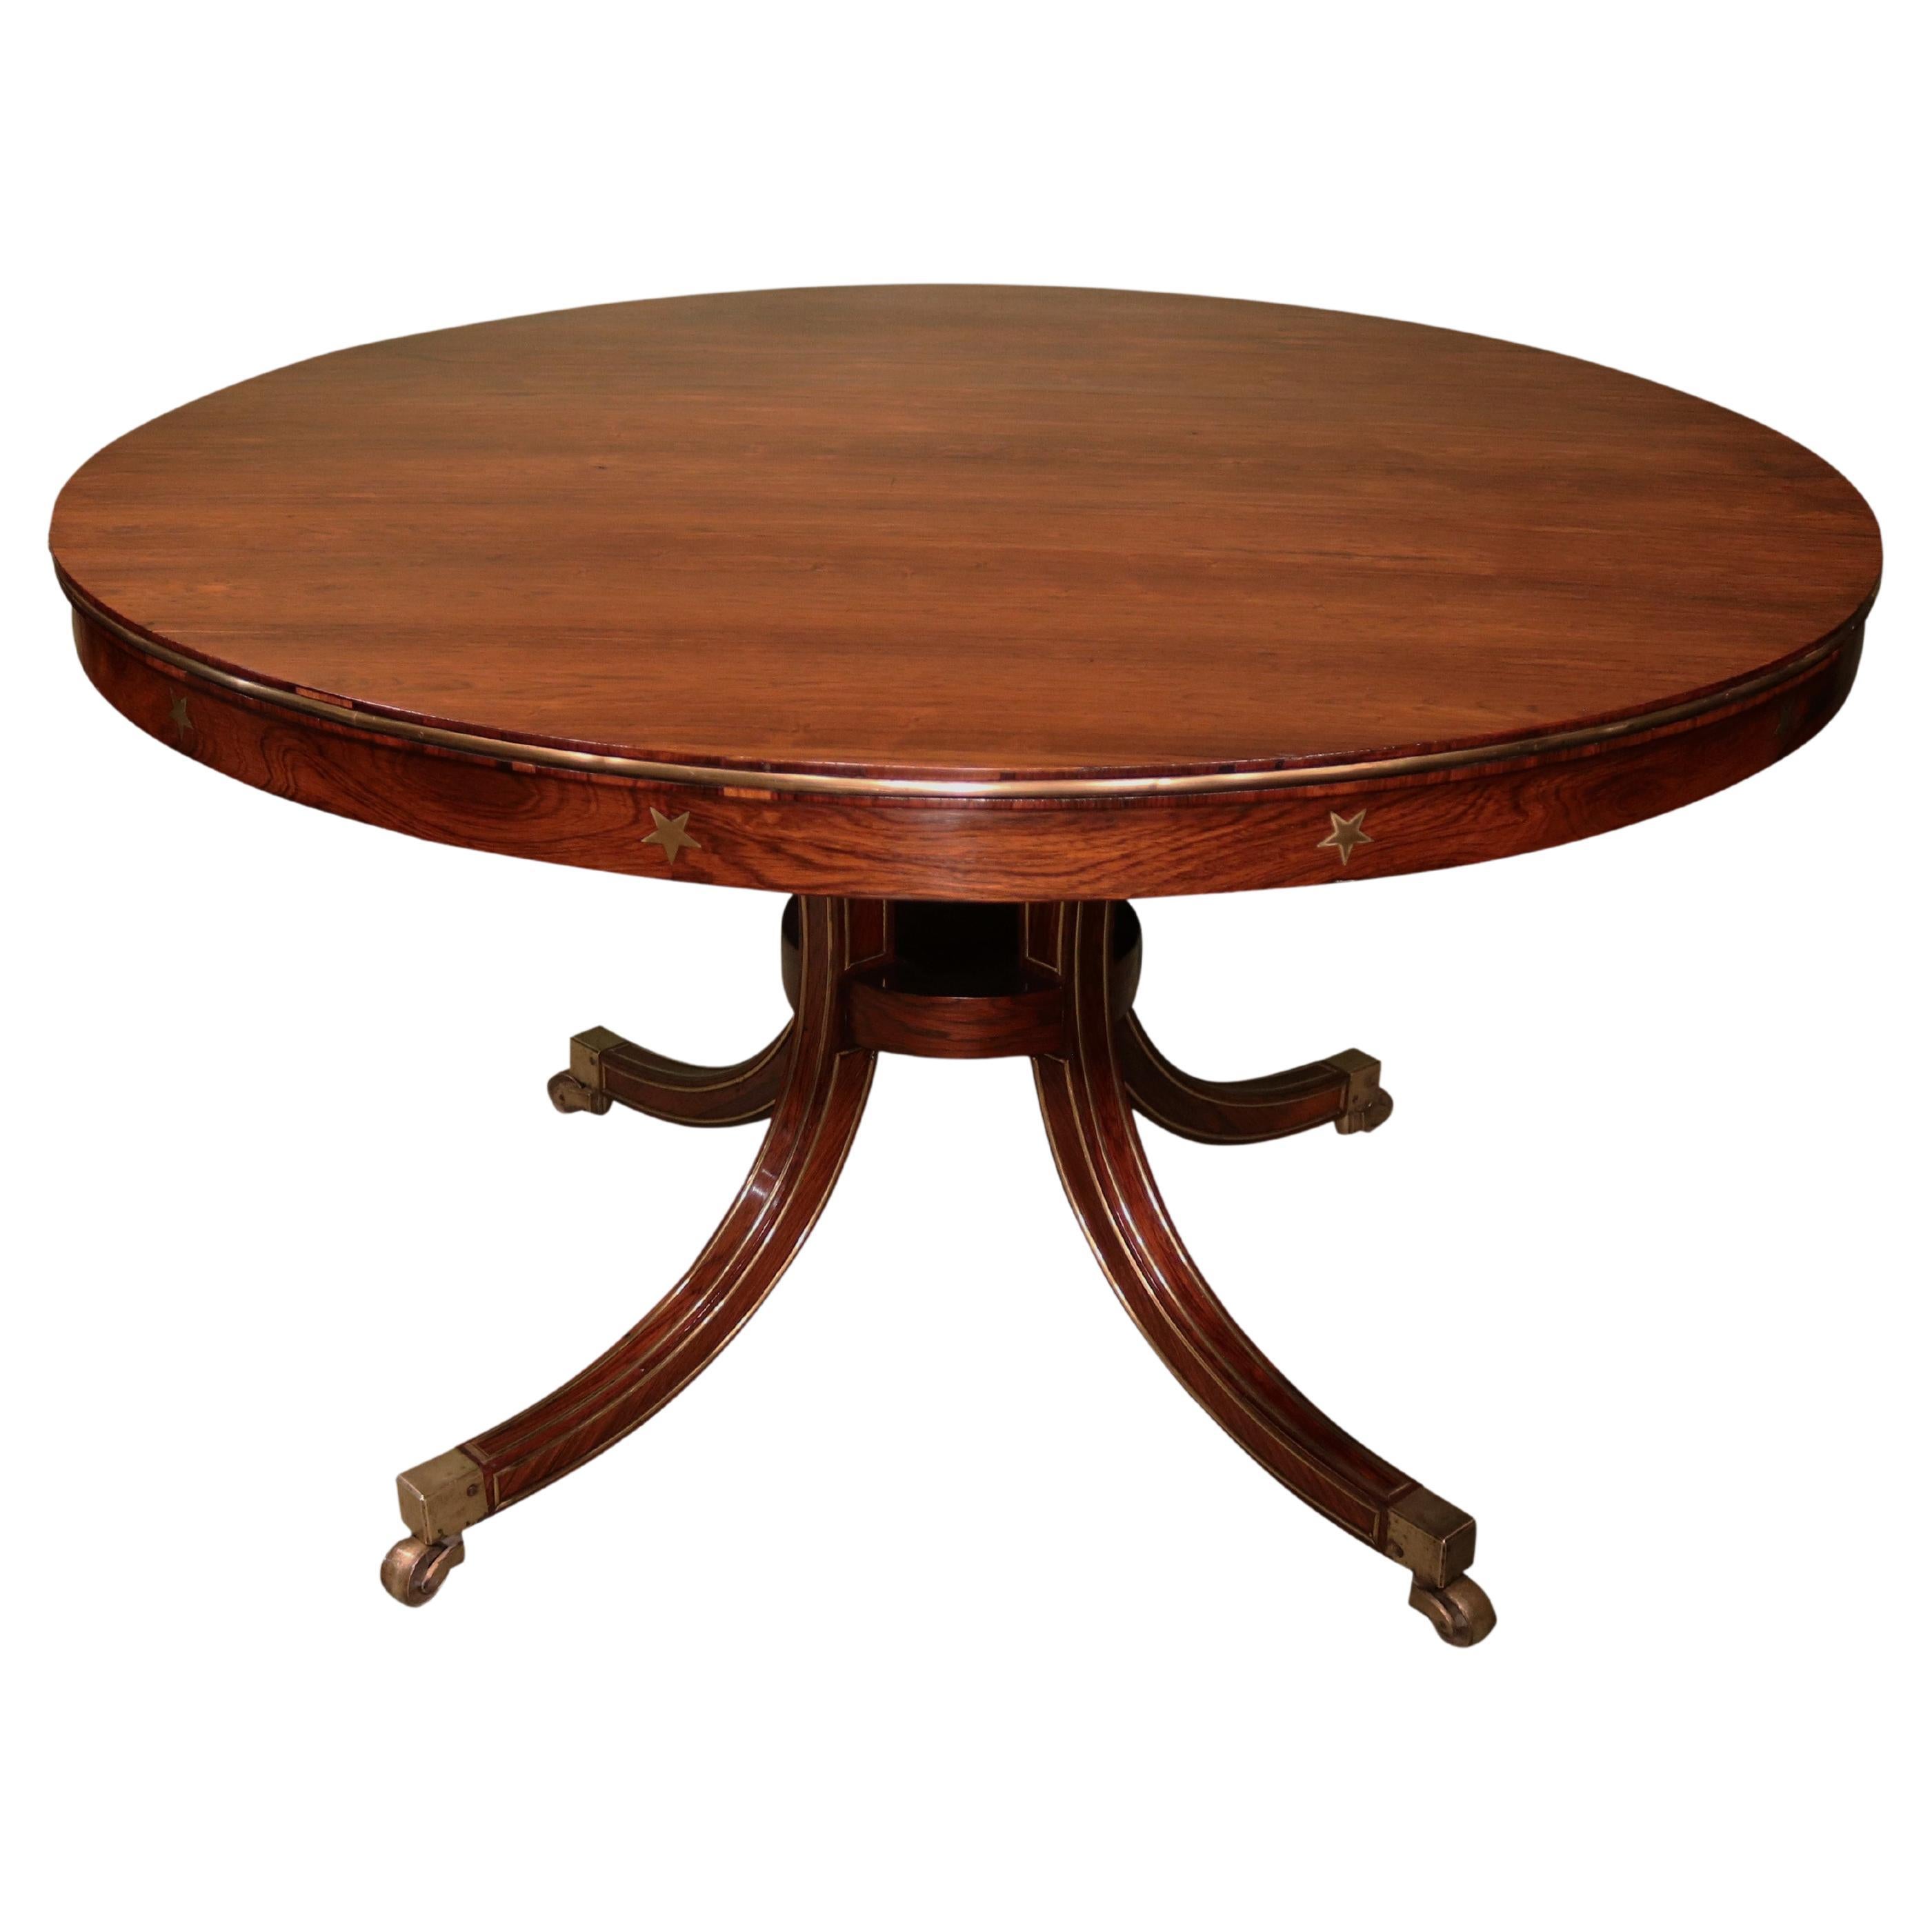 Antique Regency Period Rosewood and Brass Inlaid Circular Breakfast Table